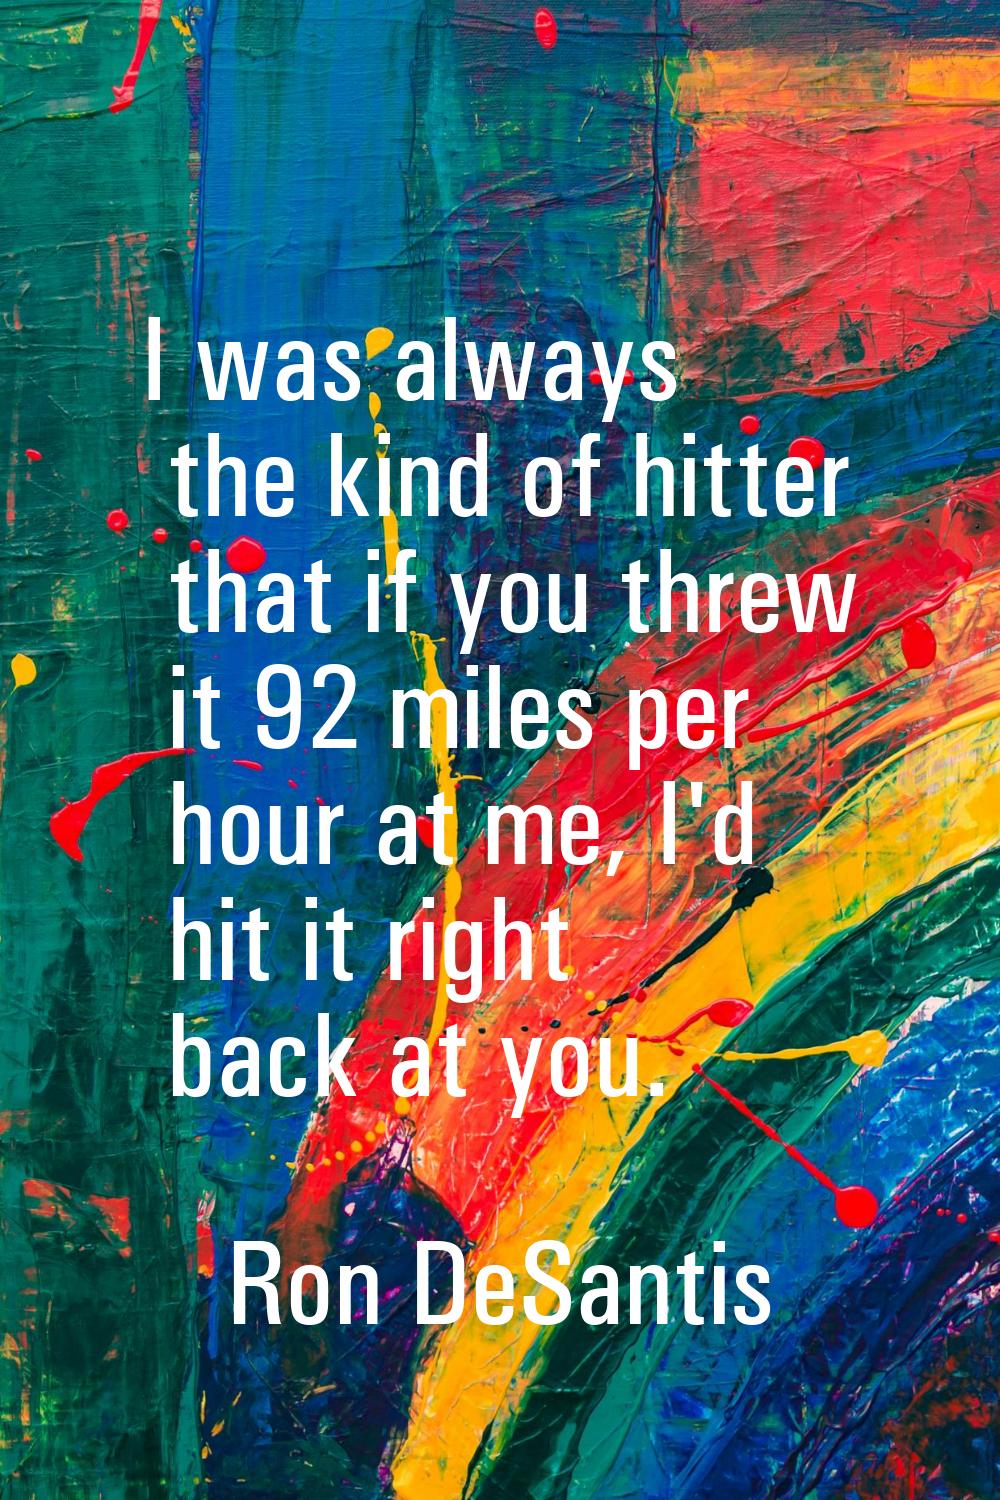 I was always the kind of hitter that if you threw it 92 miles per hour at me, I'd hit it right back